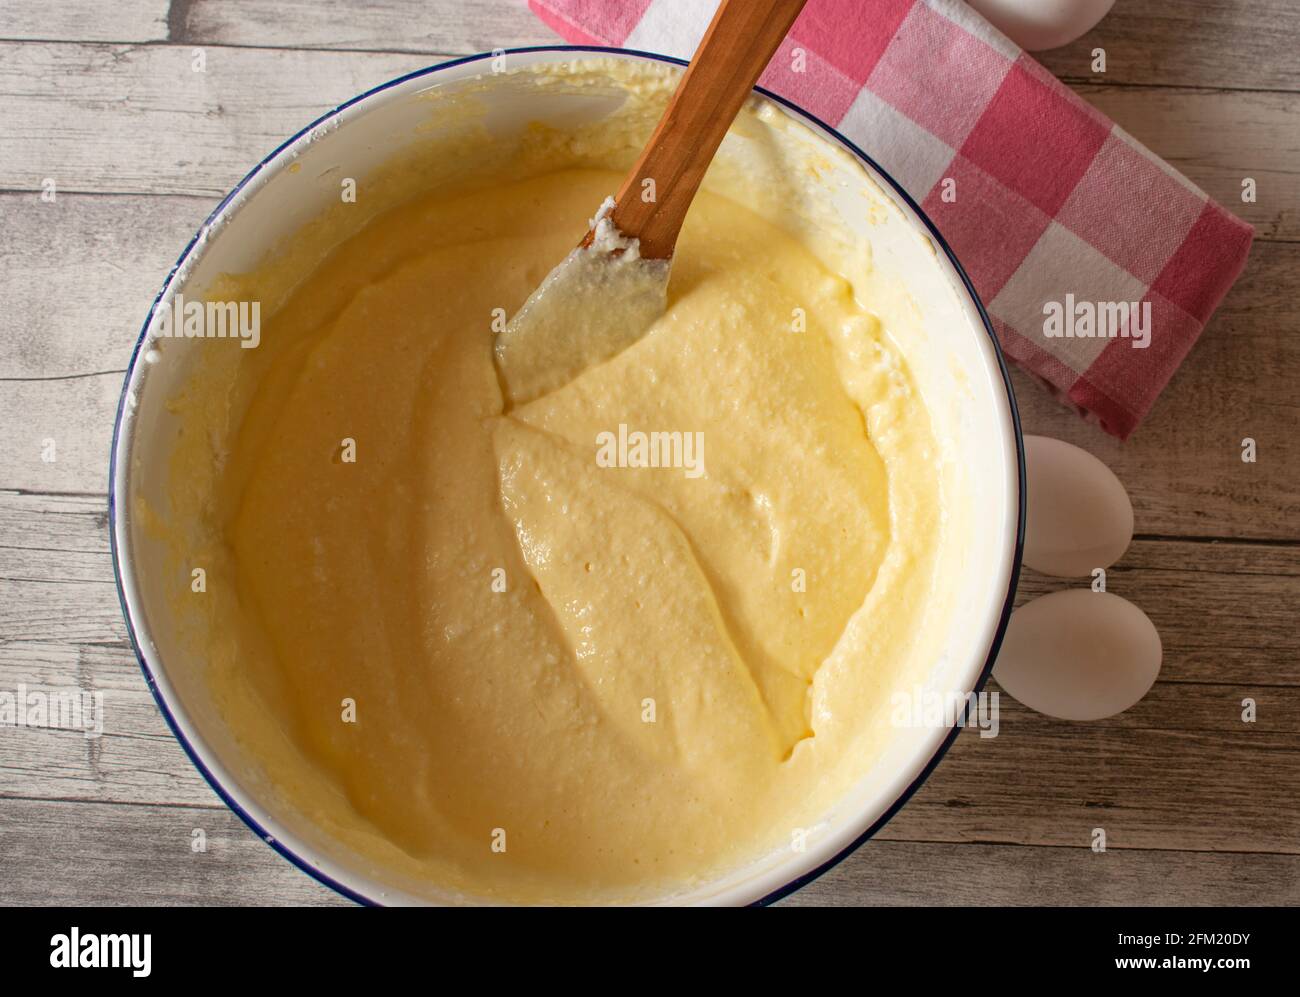 cake batter with fresh whipped egg white in a white enamel bowl on wooden table background Stock Photo